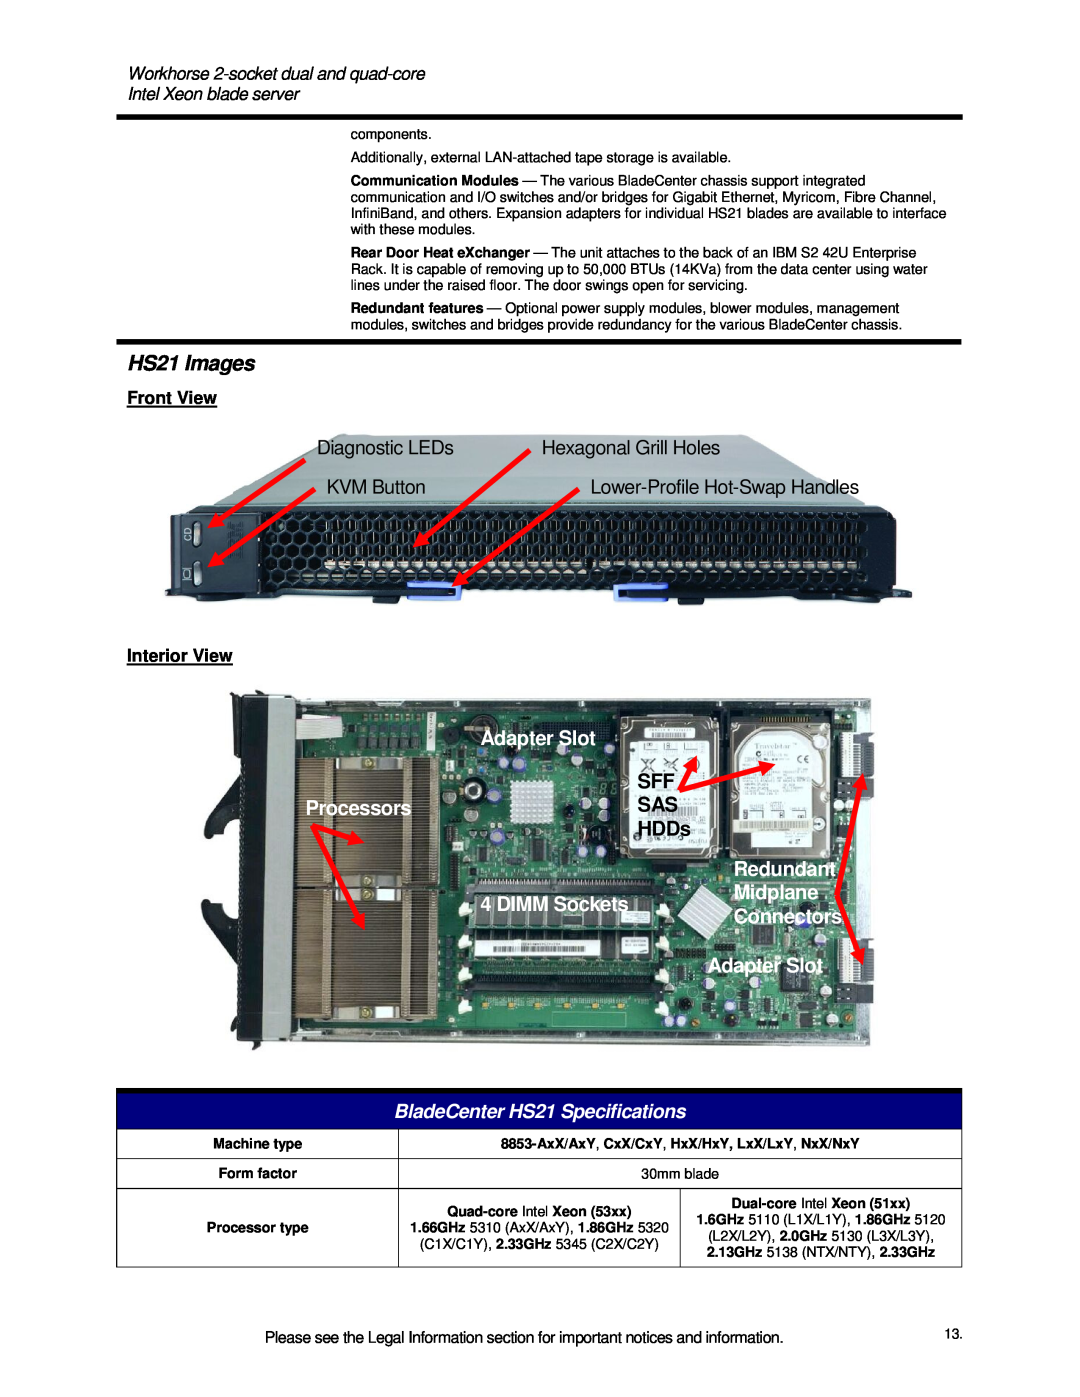 IBM HS21 Images, HDDs, Front View, Interior View, Diagnostic LEDs, Hexagonal Grill Holes, KVM Button, Adapter Slot 